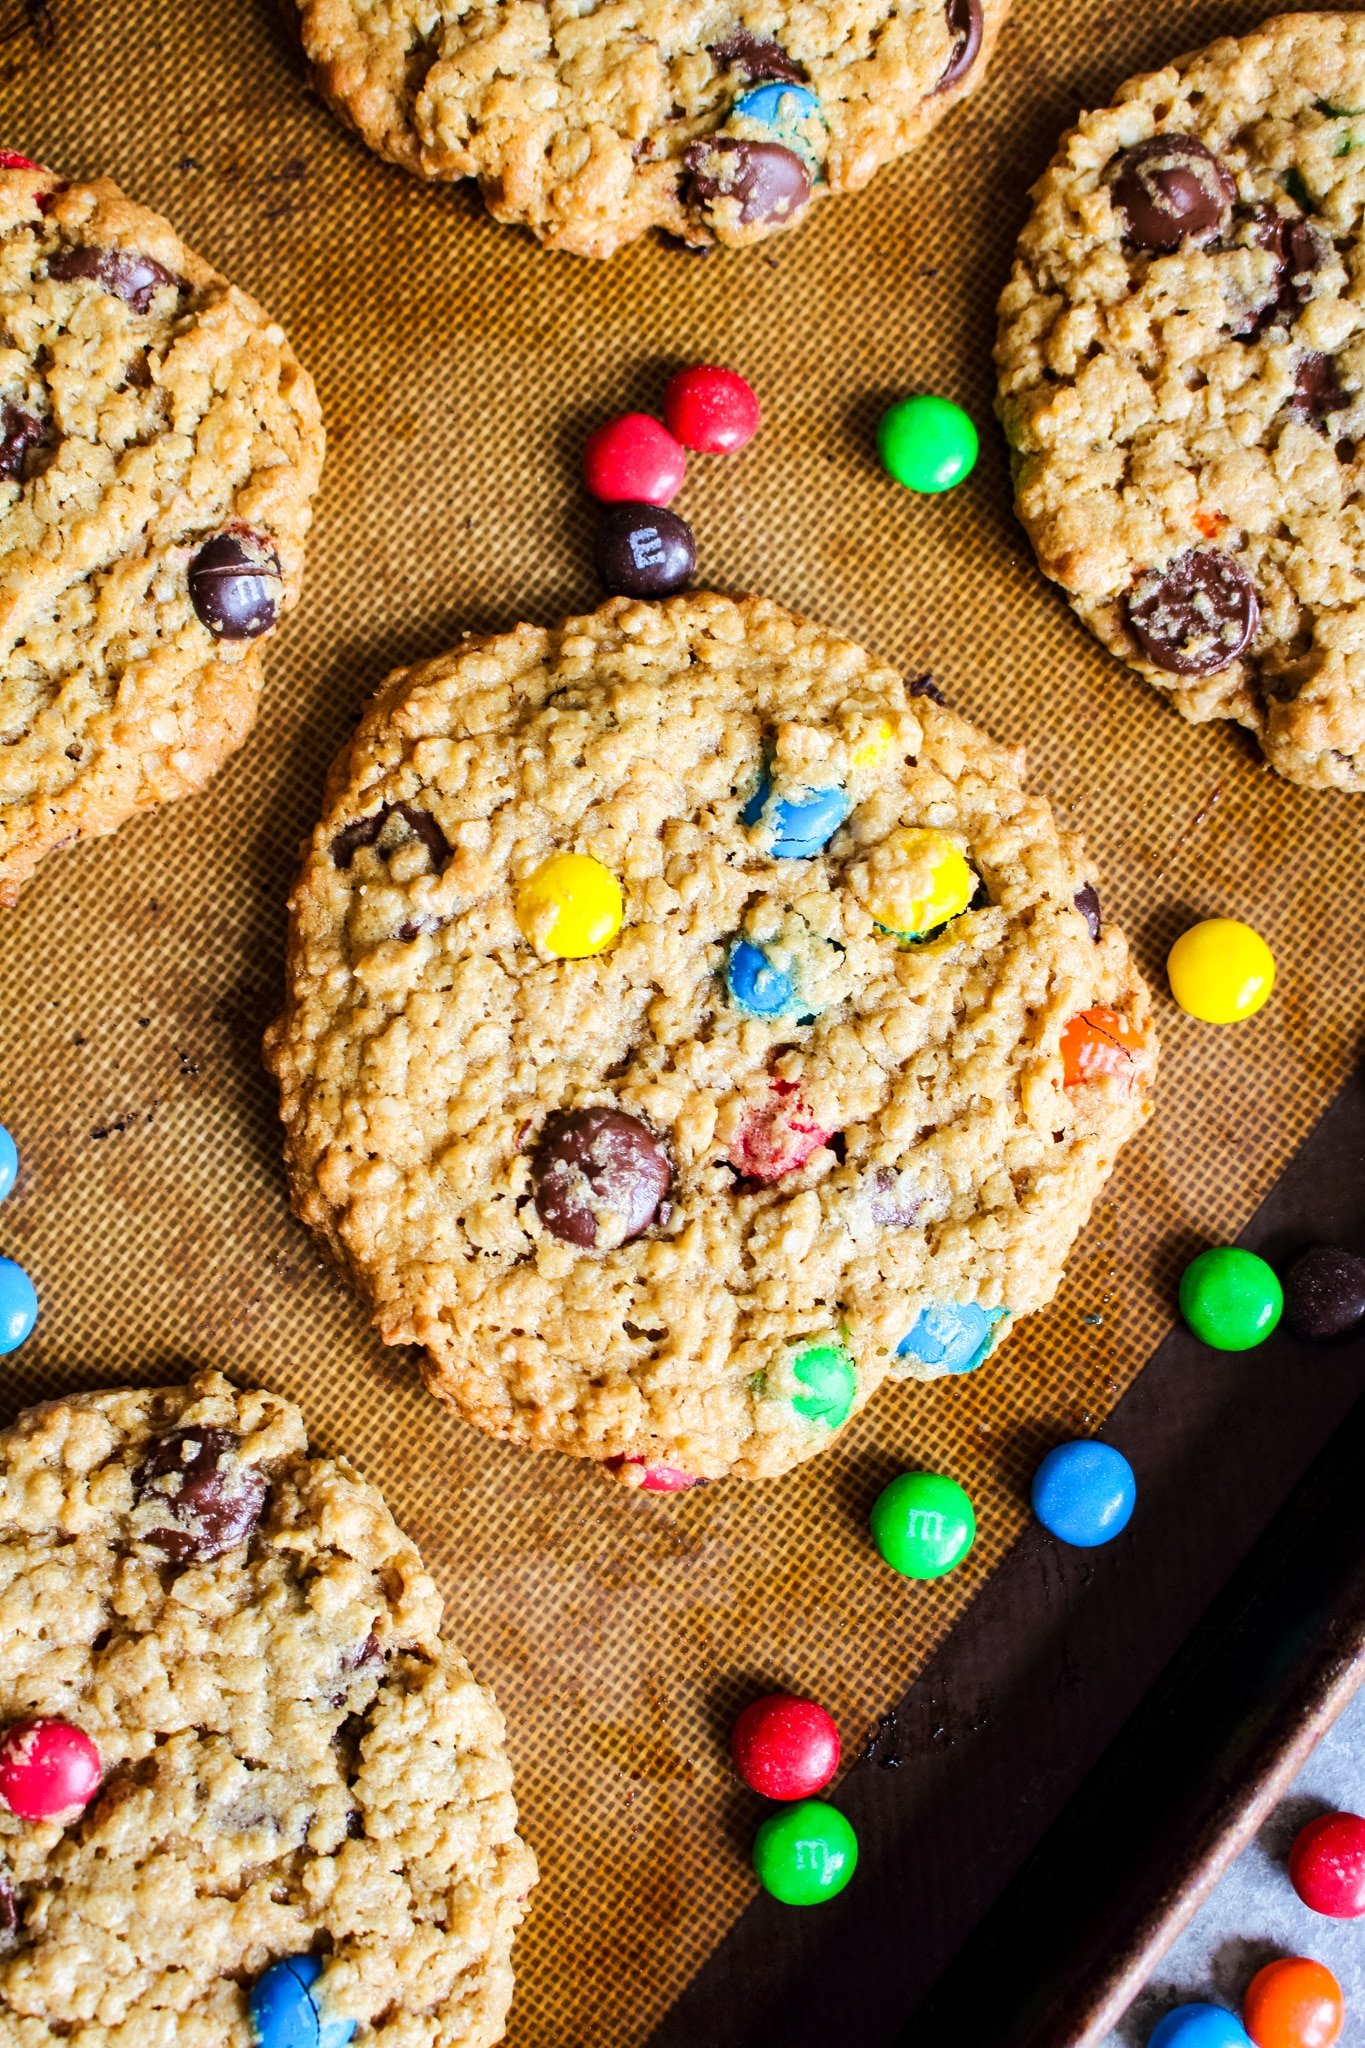 Monster cookies on baking sheet with M&M candies as a garnish.